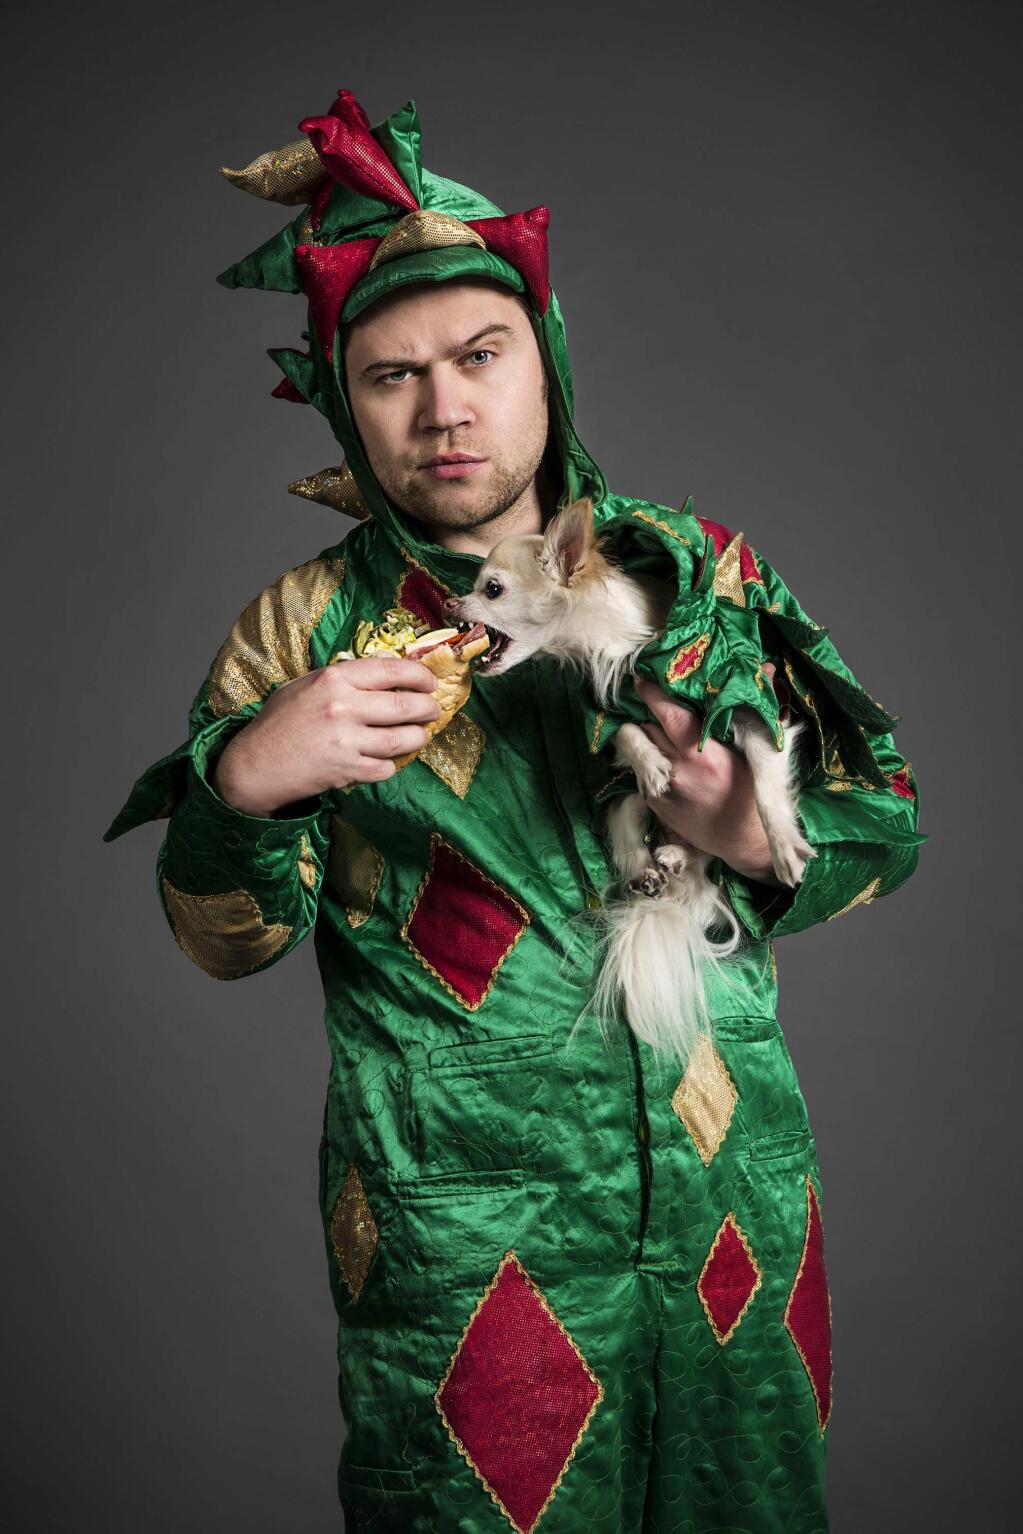 Piff the Magic Dragon, and Mr. Piffles, the World's Only Magic-Performing Chihuaha.